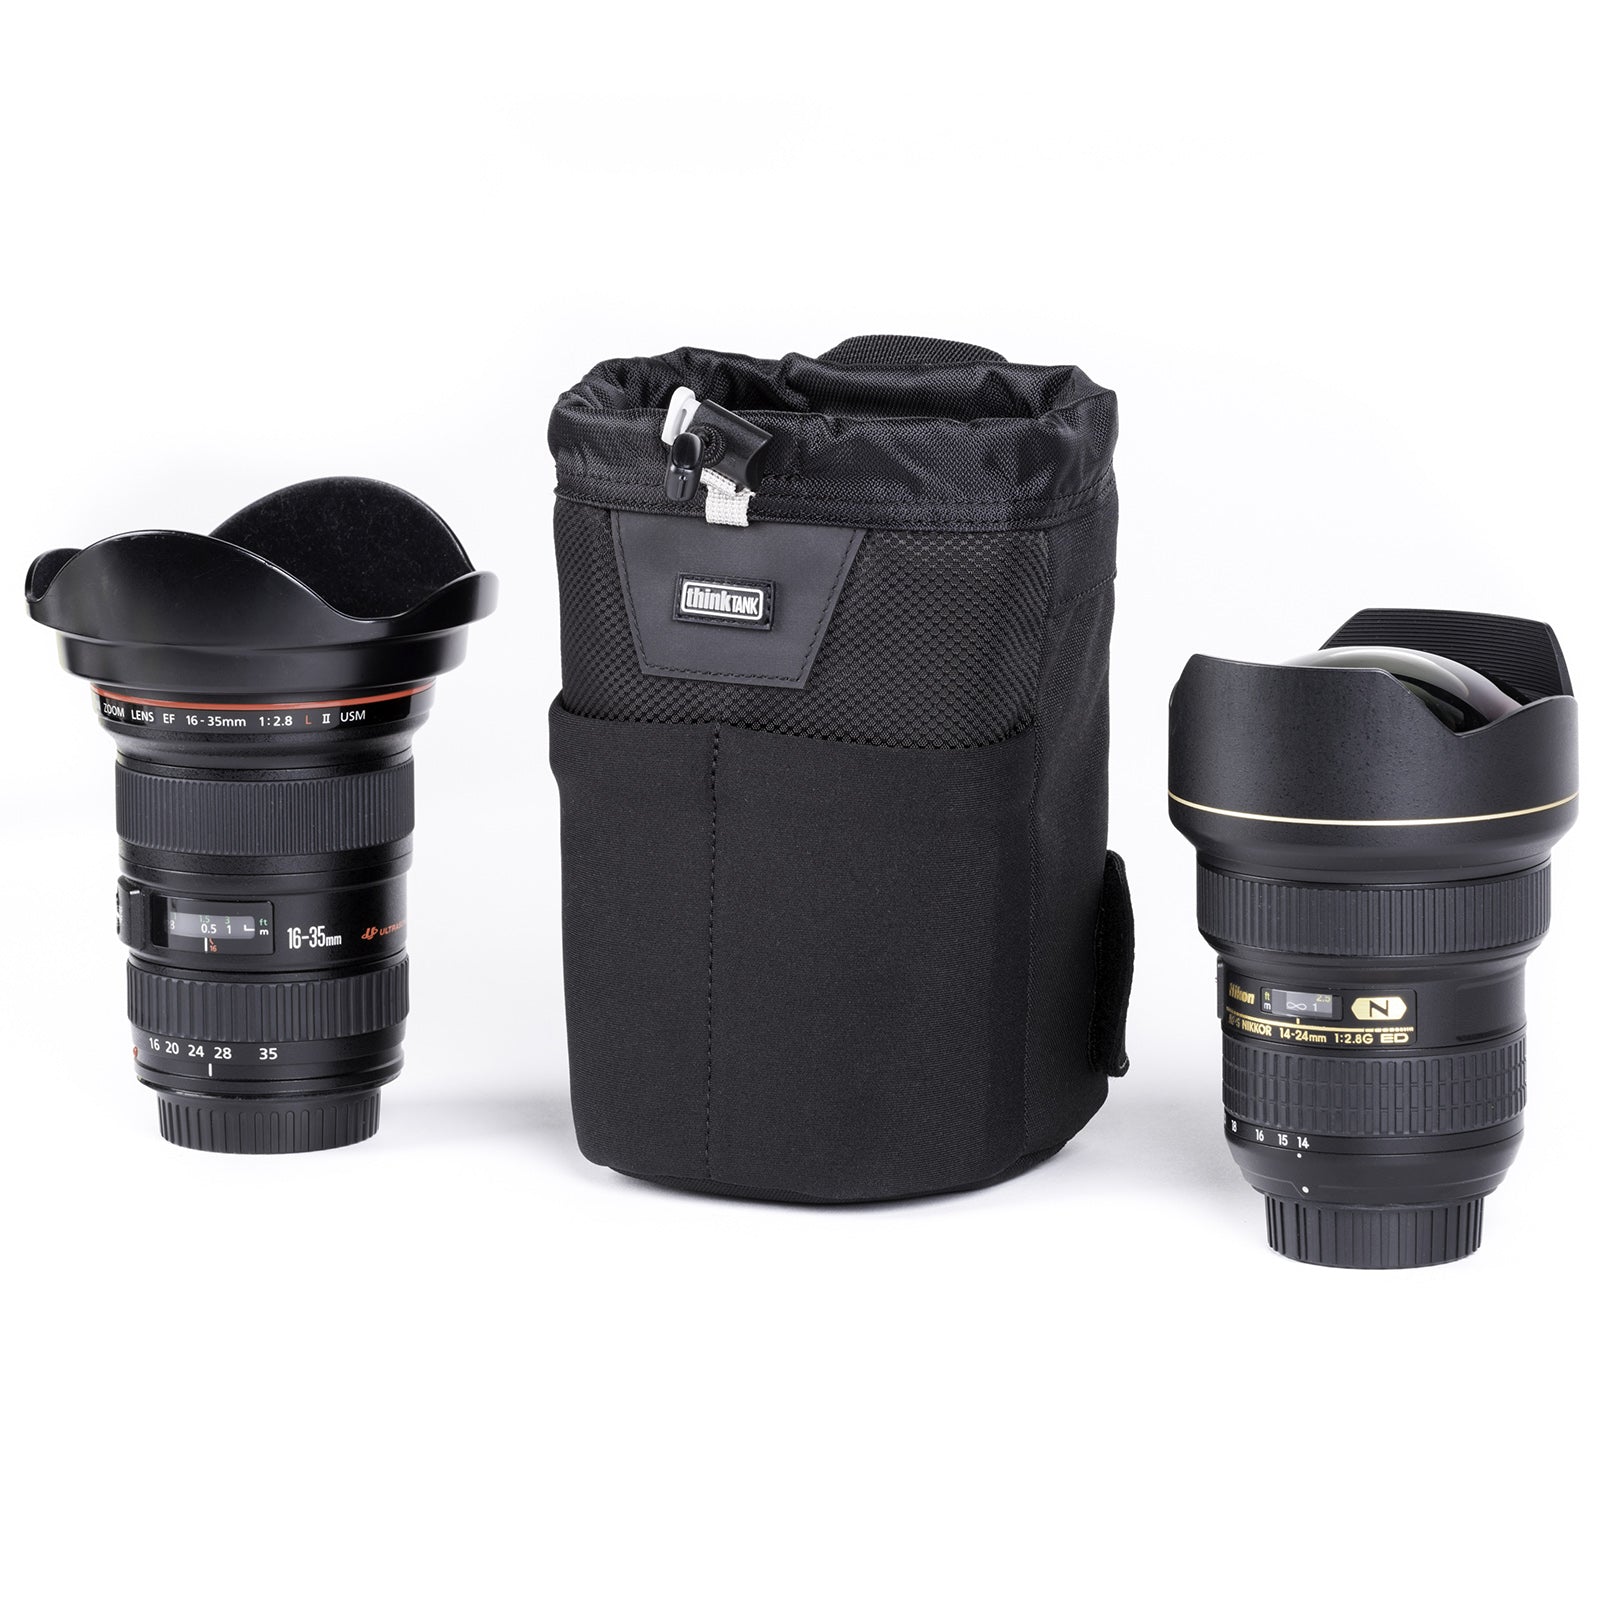 Fits wide-angle lenses with hoods in shooting position. Like 16–35mm f/2.8 or 11–24mm f/4 or 24mm f/1.4 or 14–24mm f/2.8 each with the lens hood in the shooting position